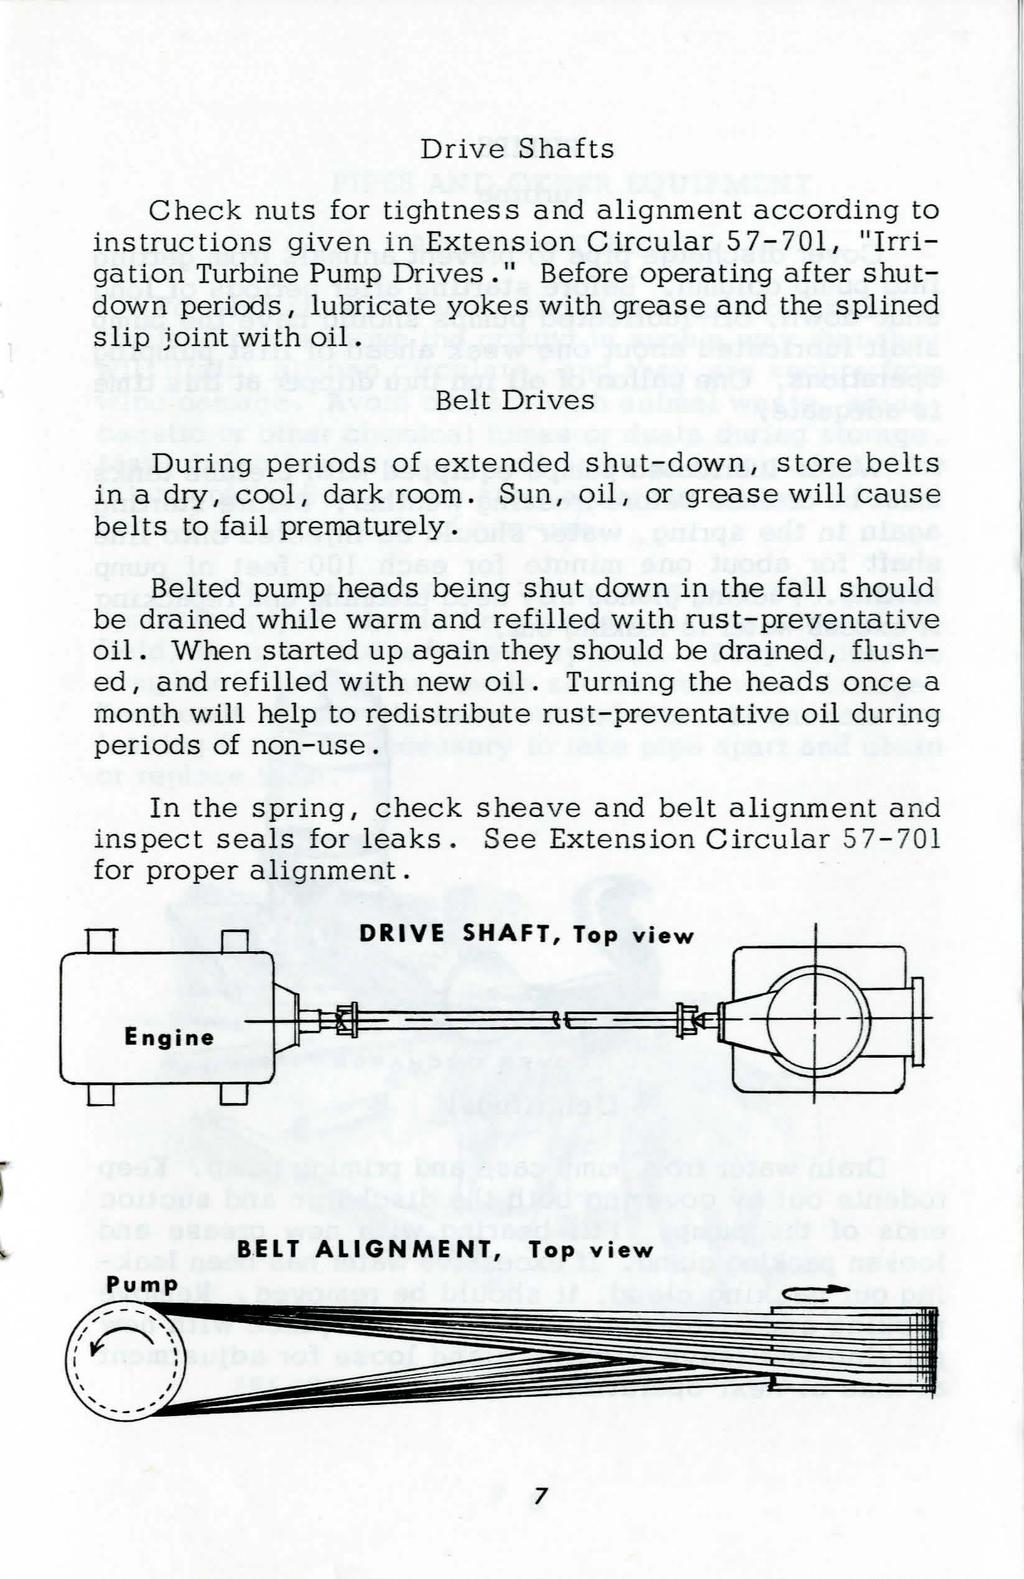 Drive Shafts Check nuts for tightness and alignment according to instructions given in Extension Circular 57-701, "Irrigation Turbine Pump Drives.